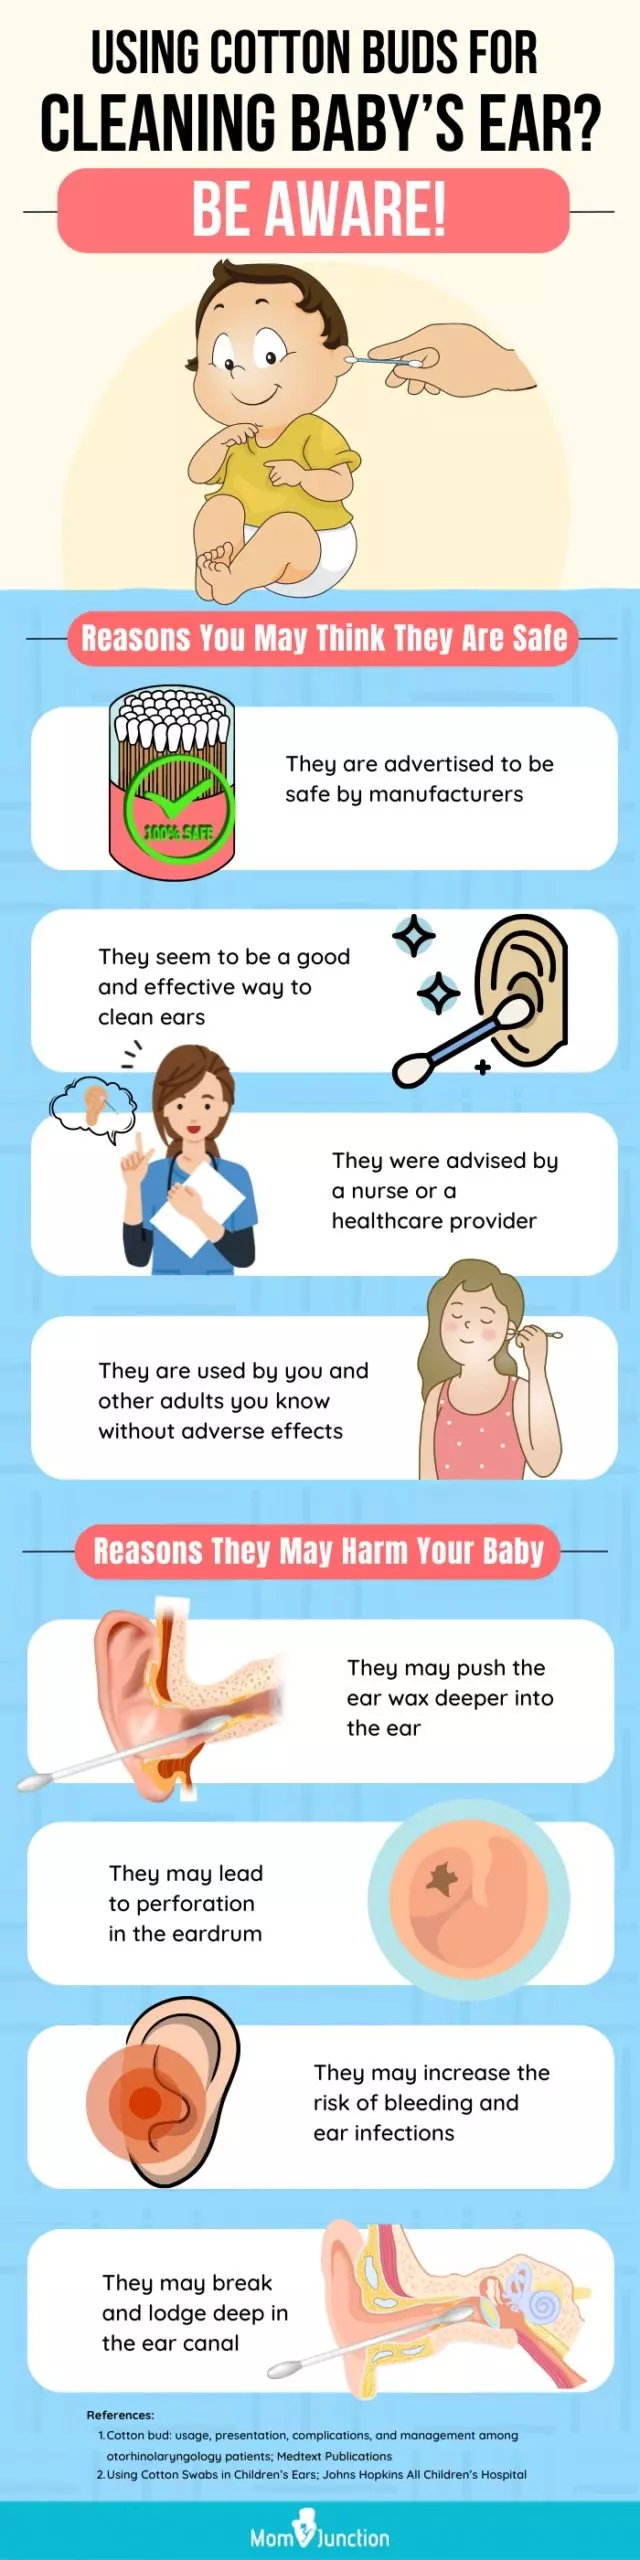 consequences of using cotton buds to clear baby’s ear (infographic)